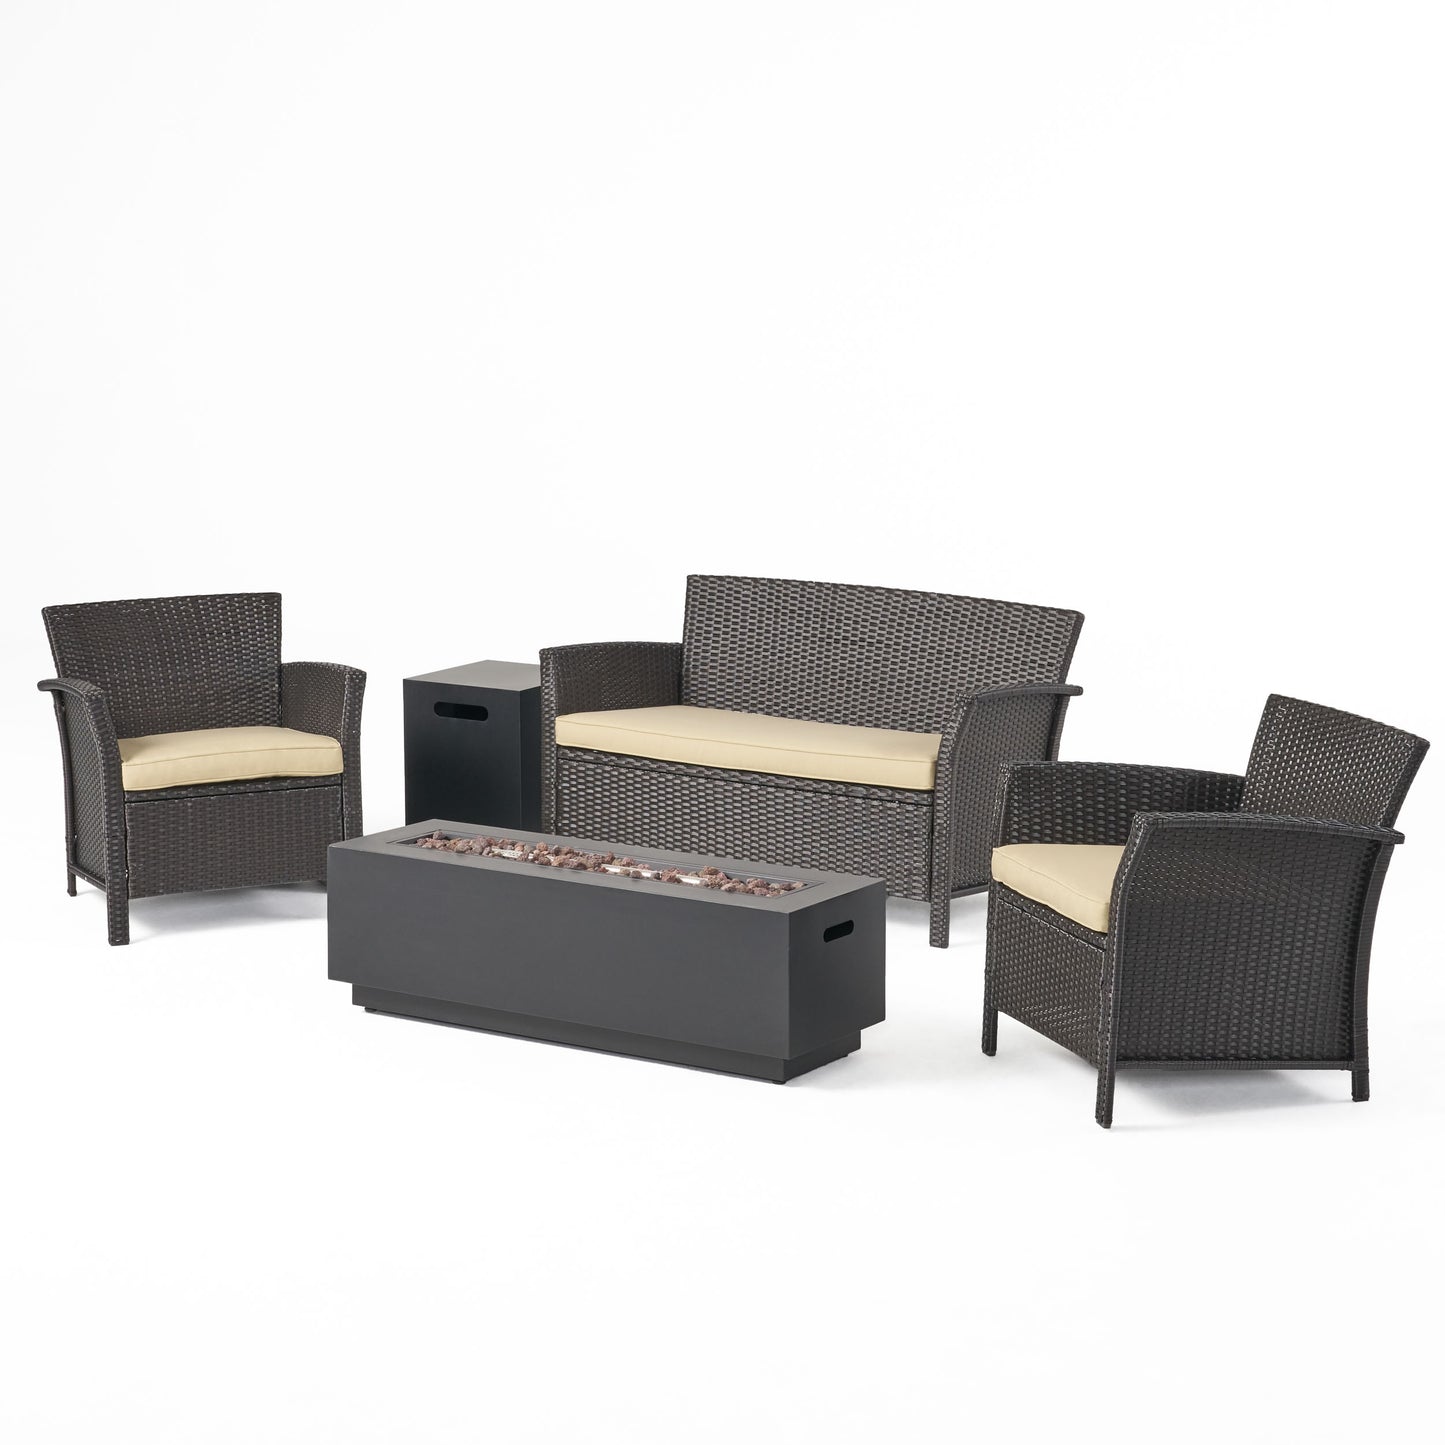 Mason Outdoor 4 Seater Wicker Chat Set with Fire Pit